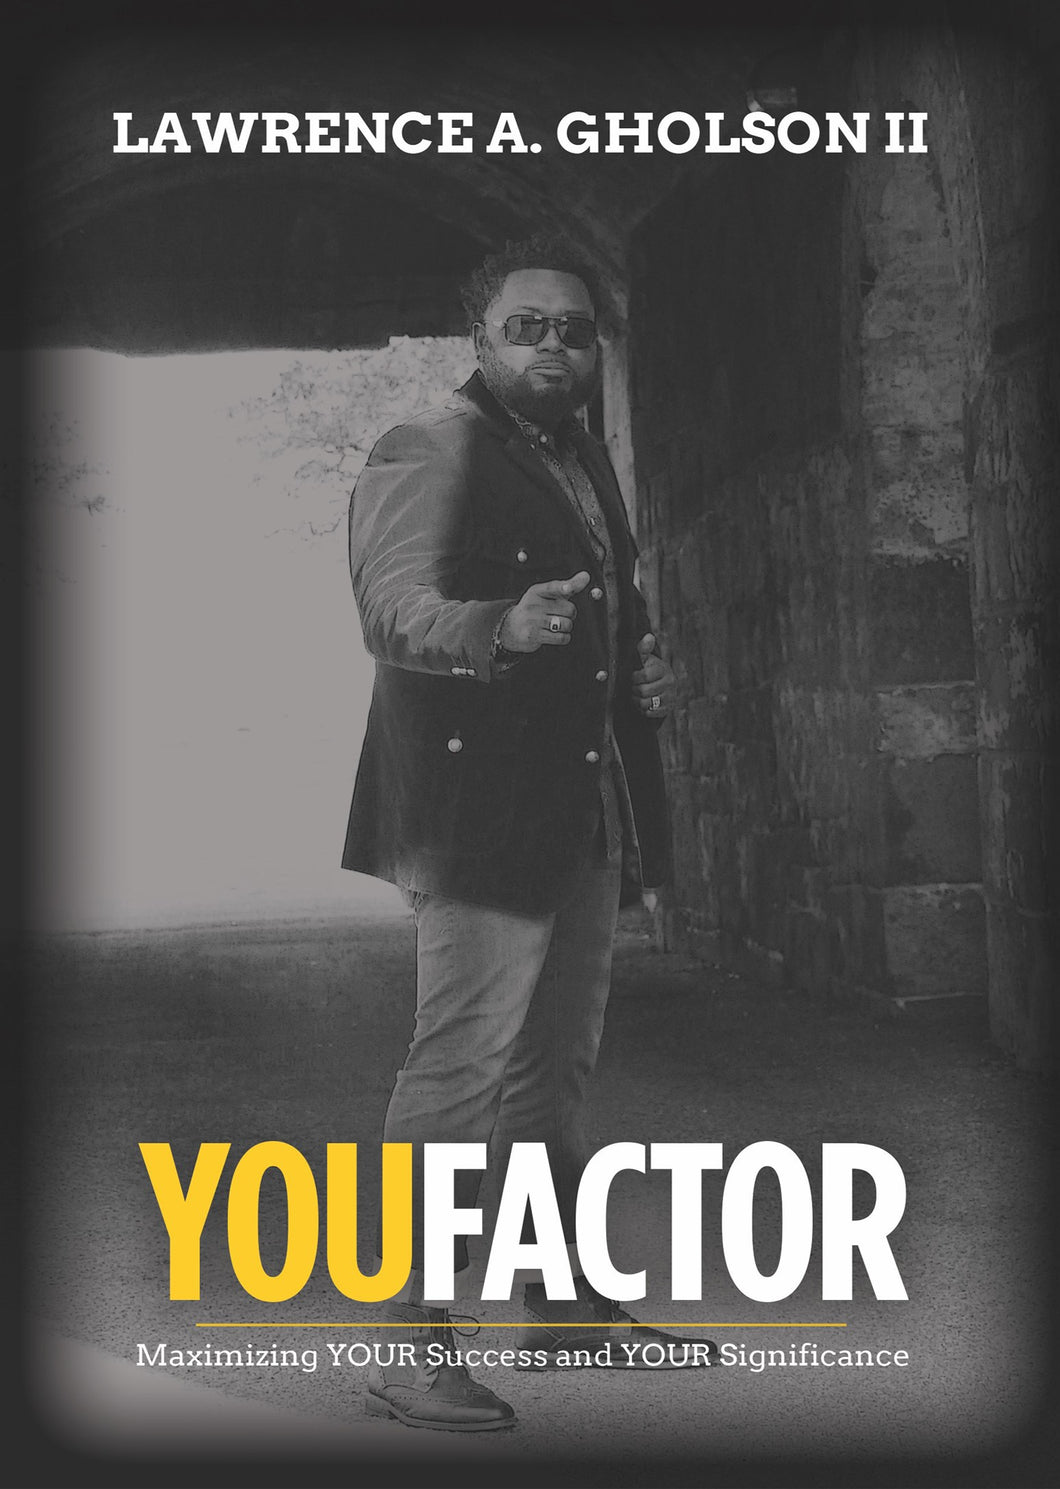 YOU FACTOR: Maximizing YOUR Success and YOUR Significance